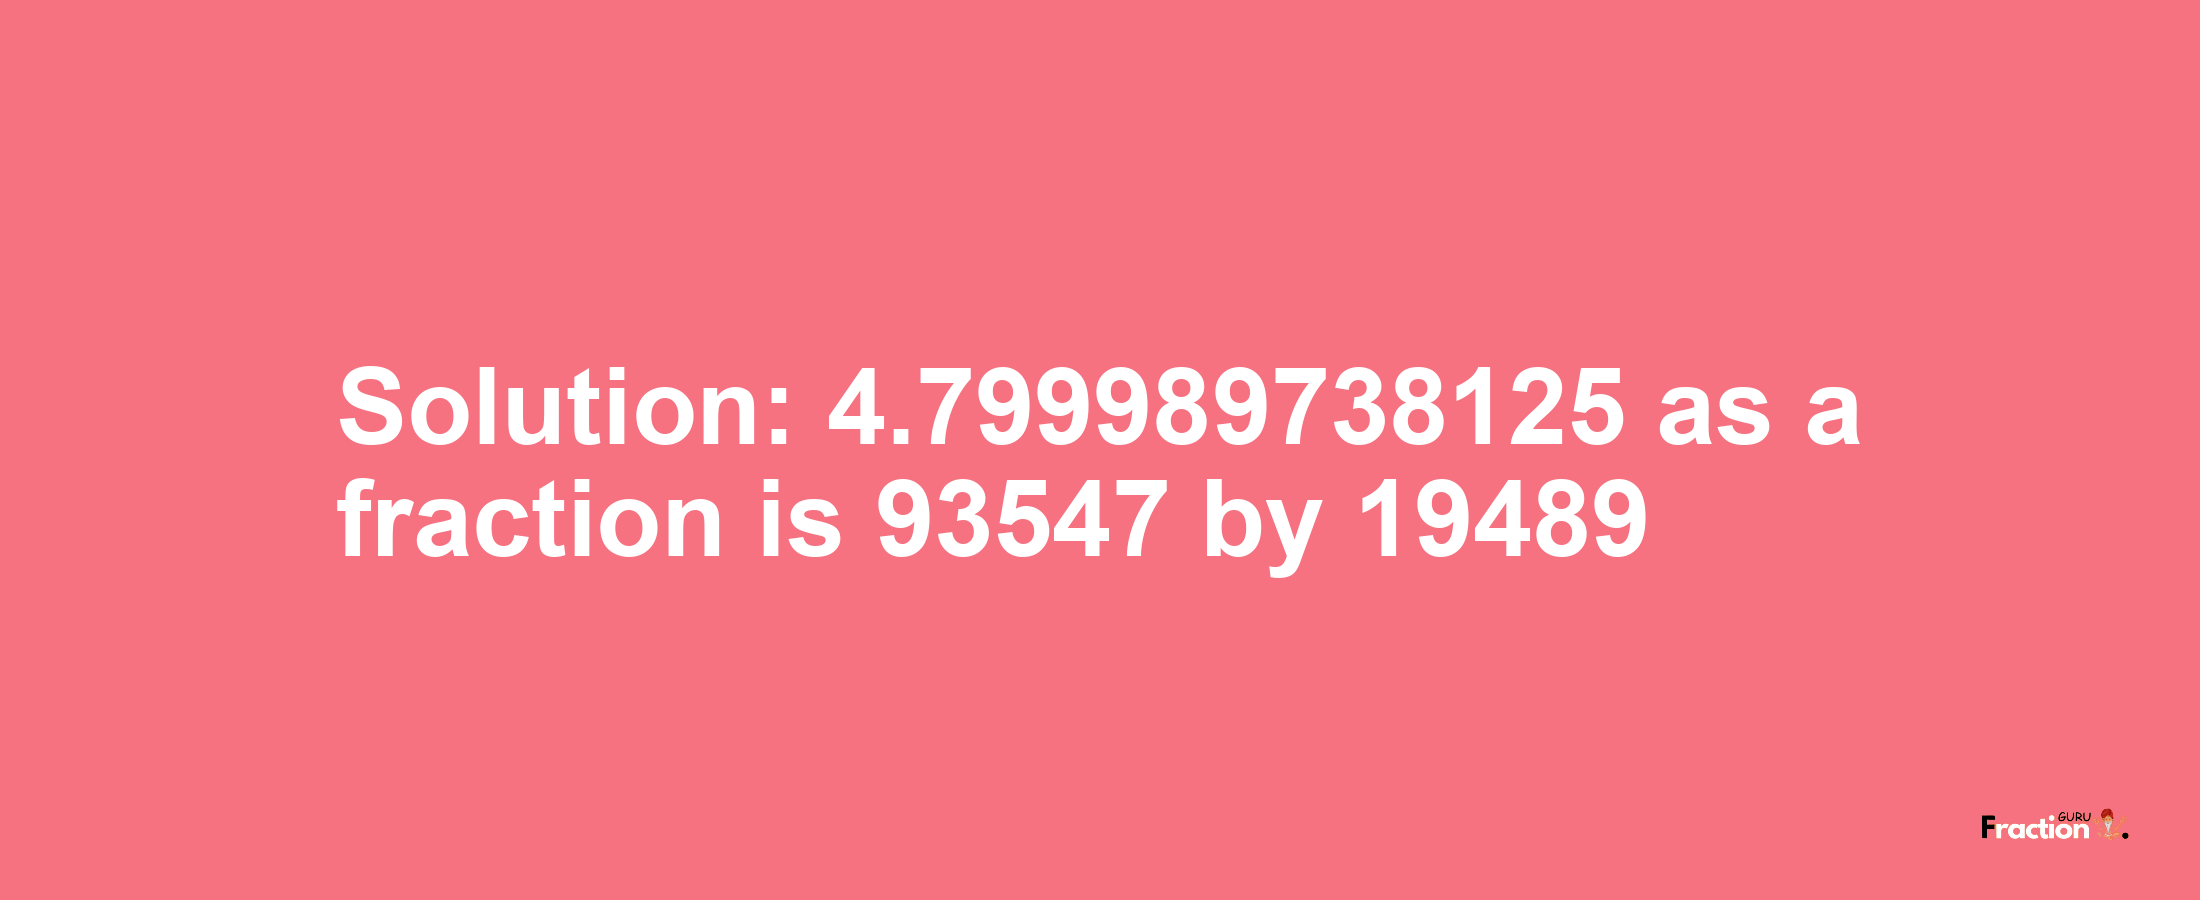 Solution:4.799989738125 as a fraction is 93547/19489